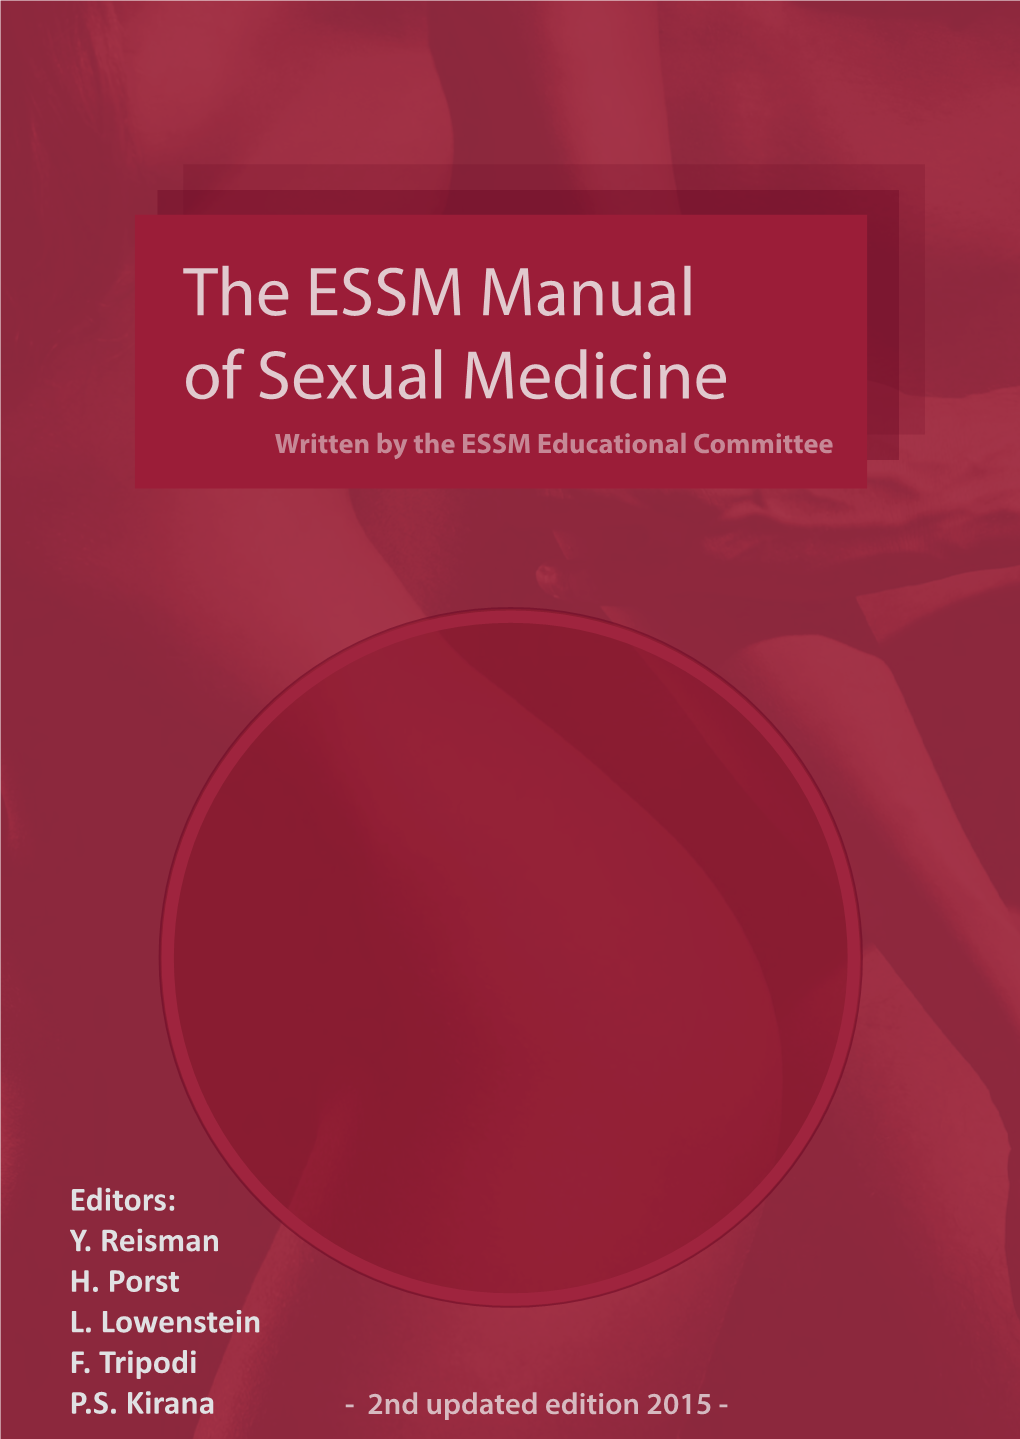 The ESSM Manual of Sexual Medicine Written by the ESSM Educational Committee